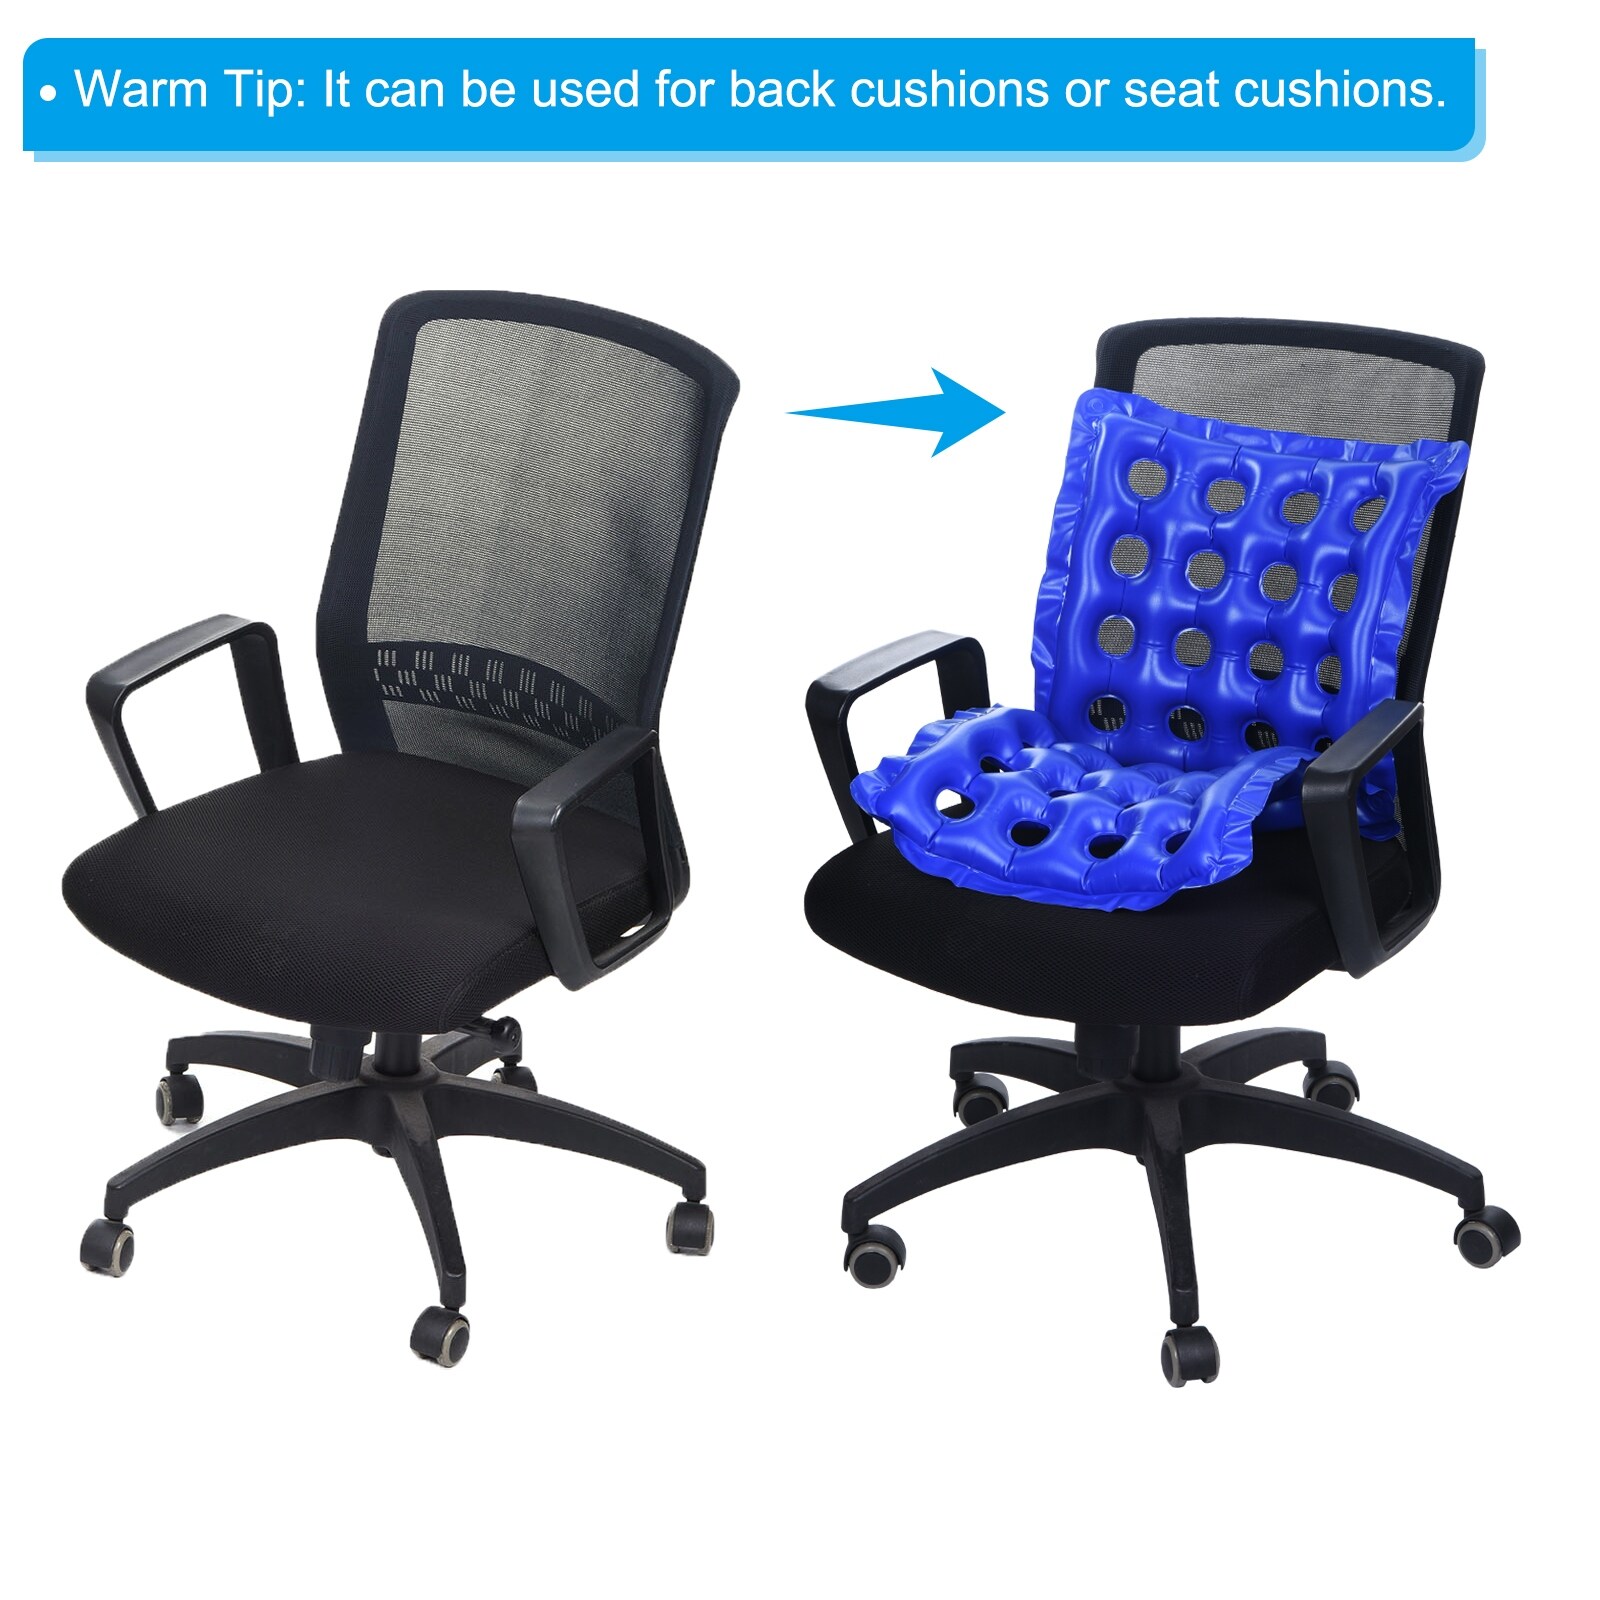 Chair Cushions Office Chairs, Seat Cushions Office Chairs